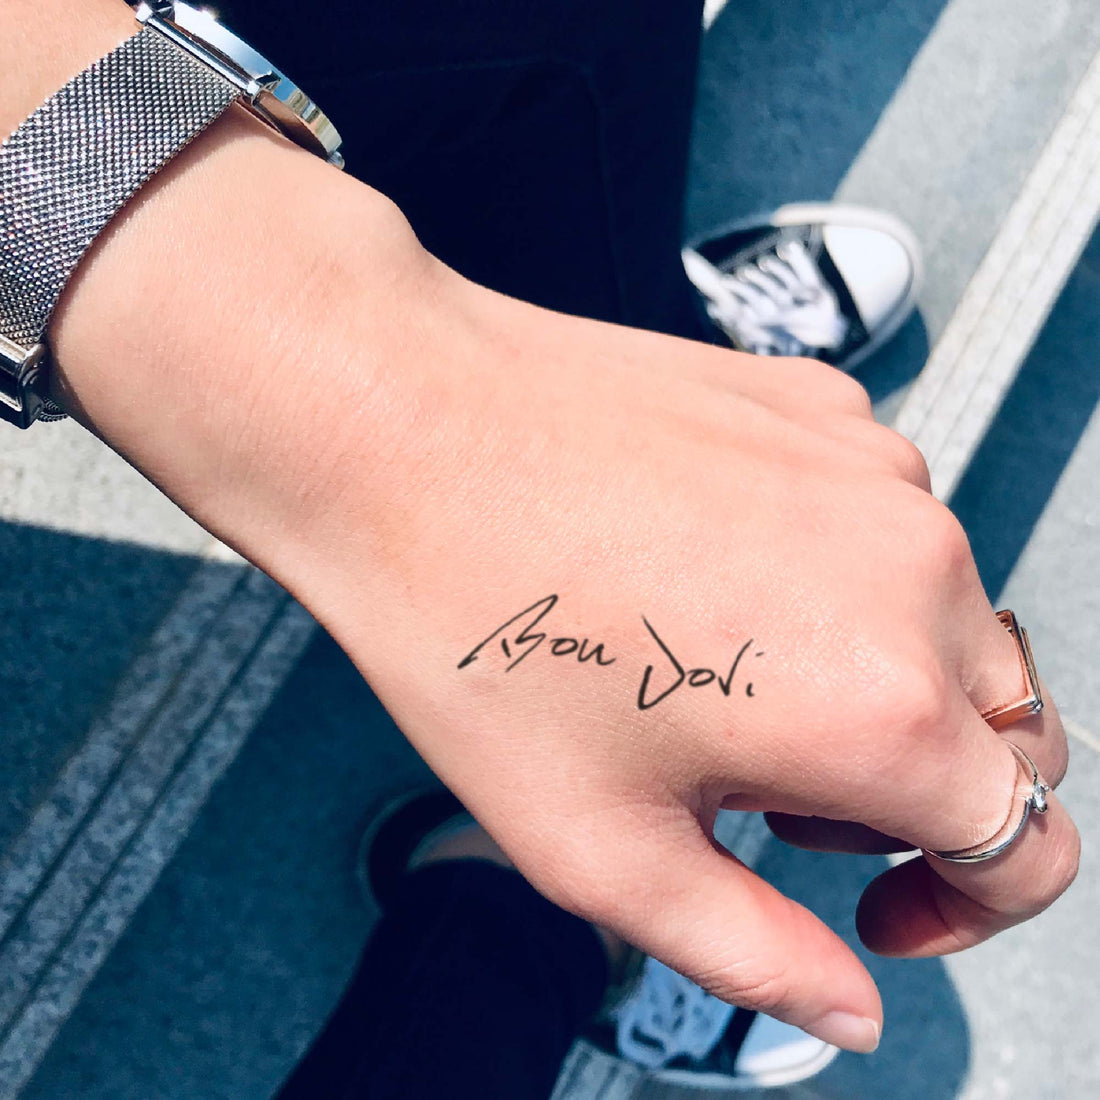 Bon Jovi custom temporary tattoo sticker design idea inspiration meanings removal arm wrist hand words font name signature calligraphy lyrics tour concert outfits merch accessory gift souvenir costumes wear dress up code